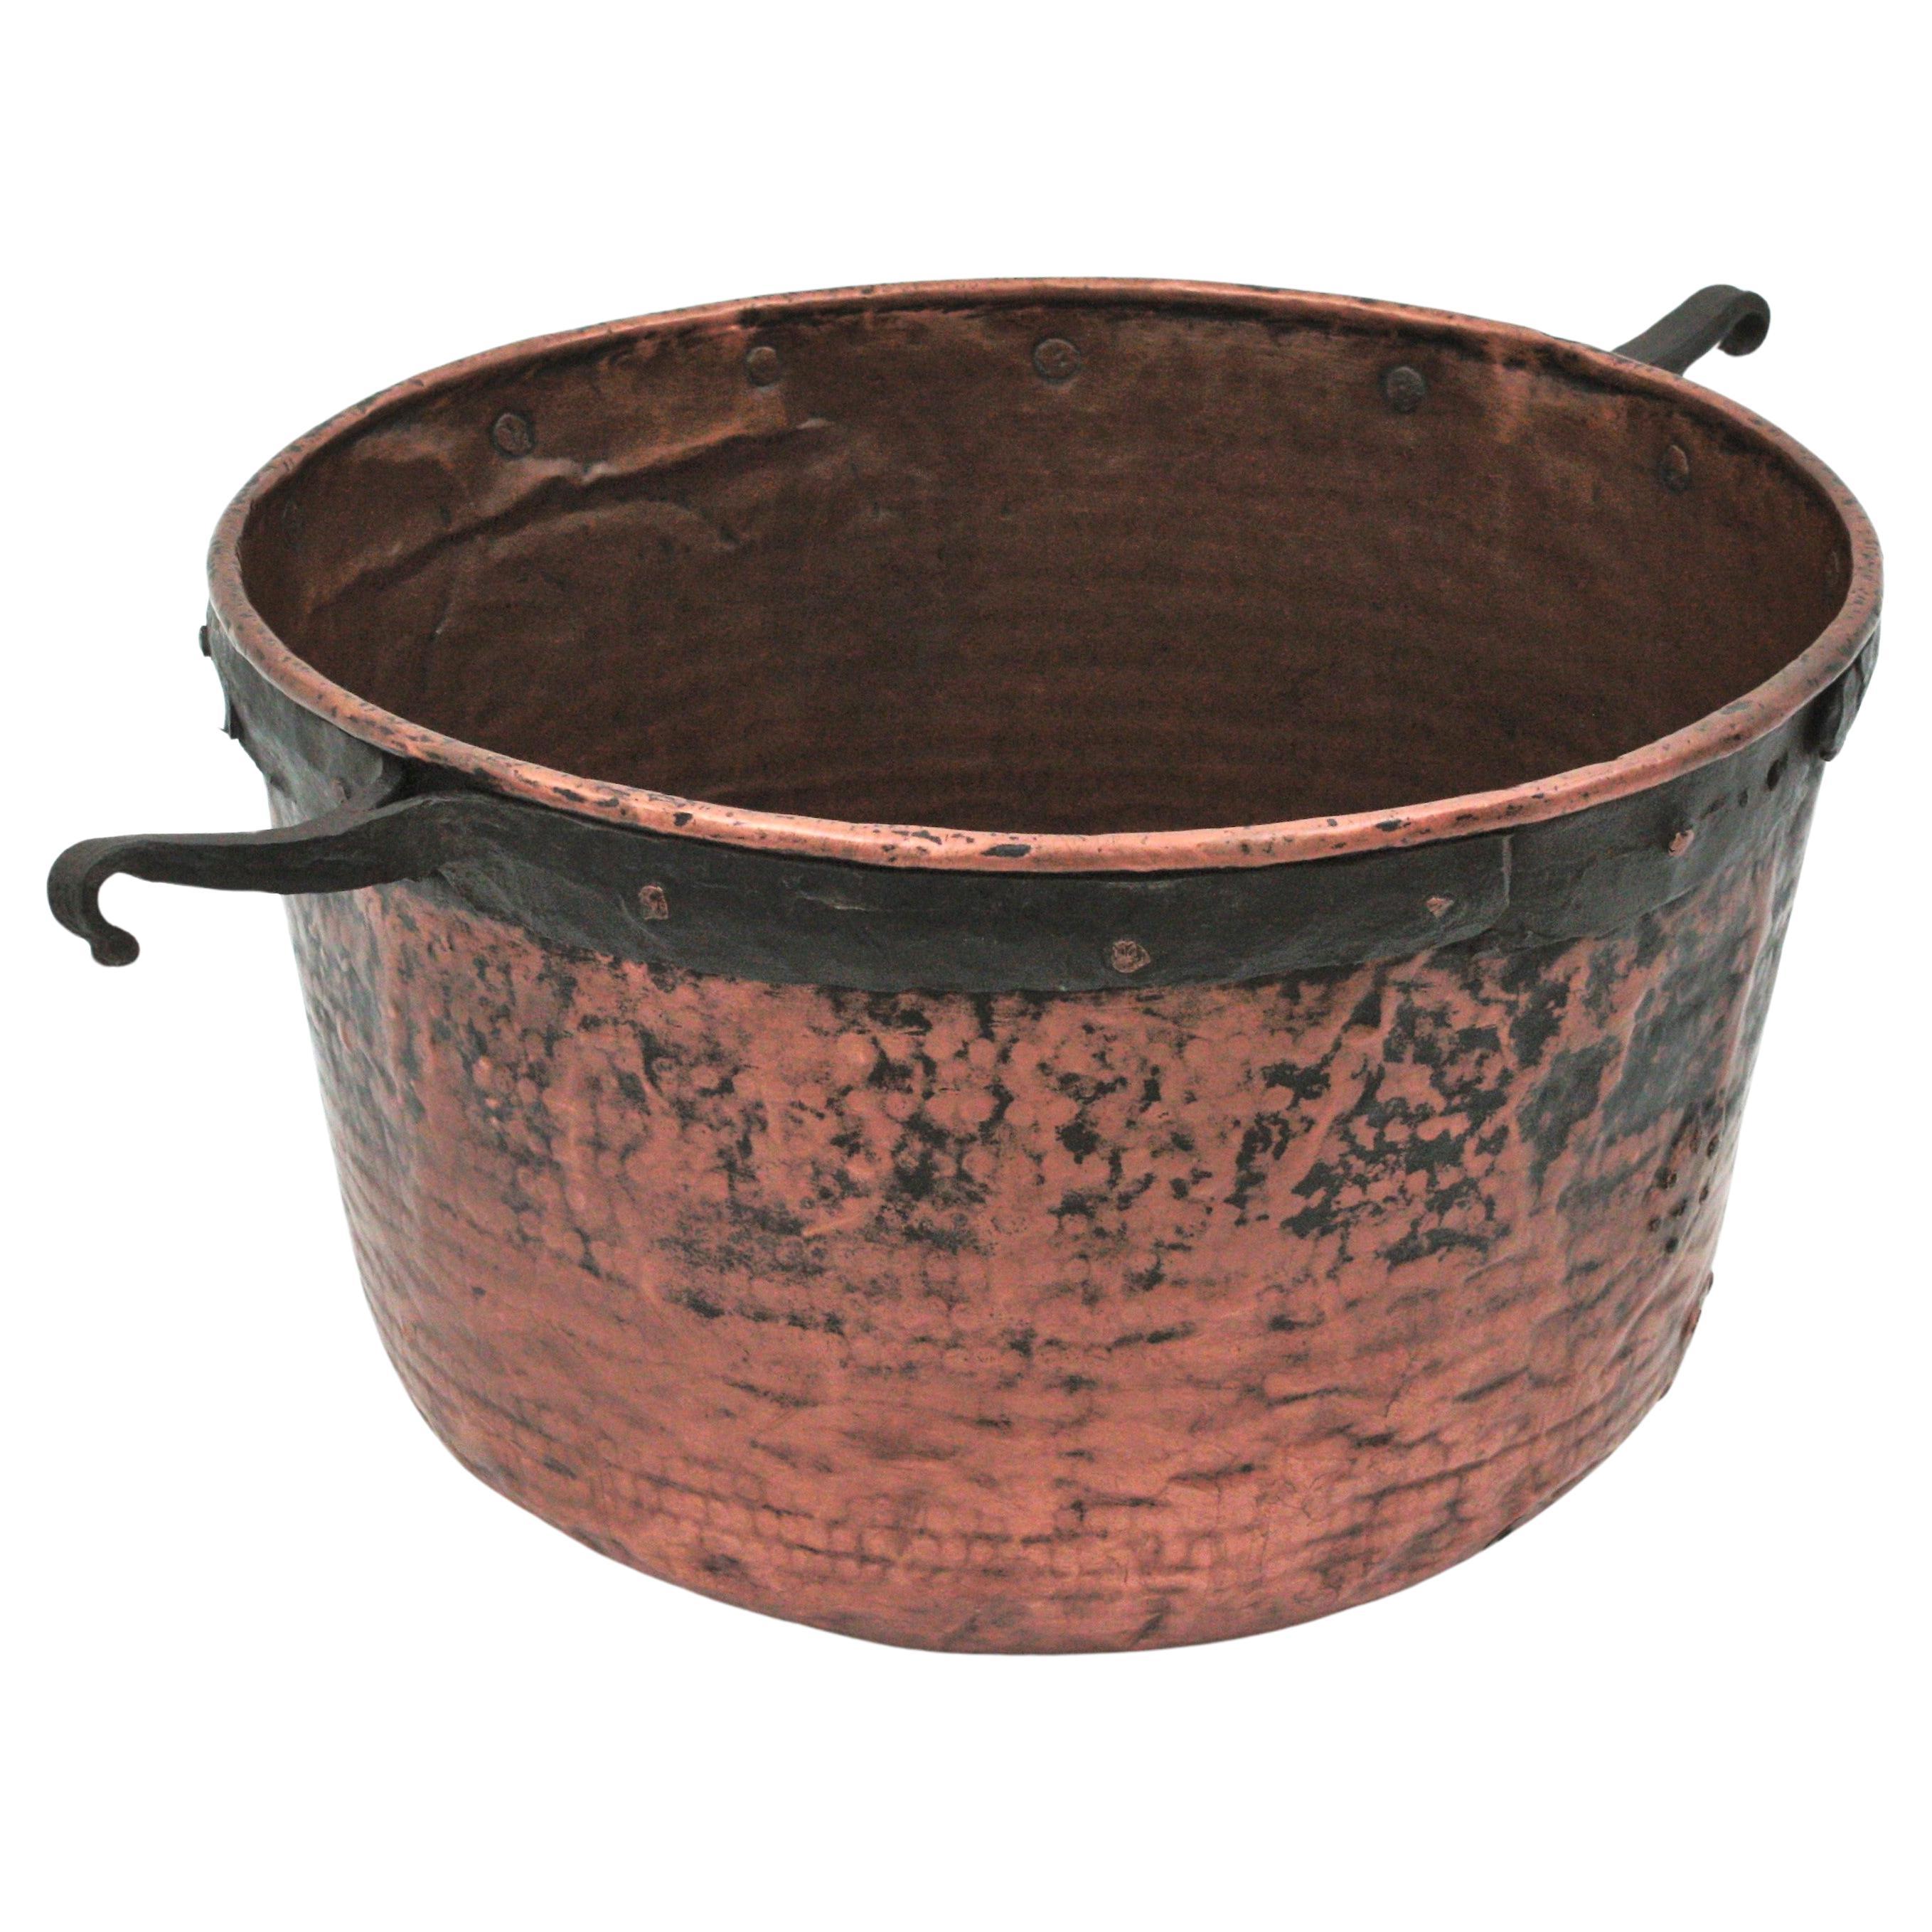 Massive Spanish Copper Cauldron with Iron Hook Handles For Sale